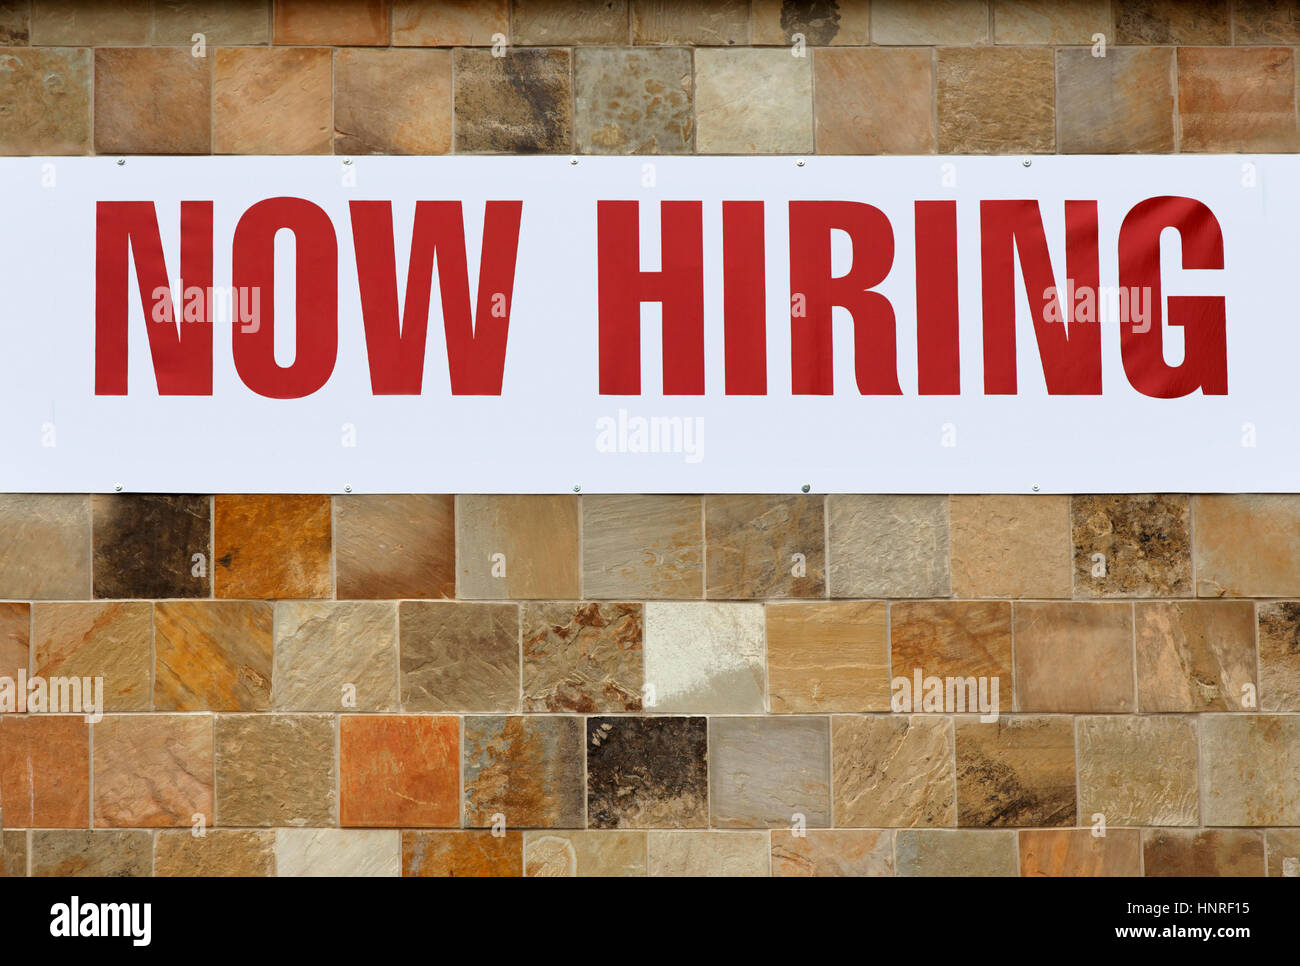 NOW HIRING sign on tiled wall. Stock Photo